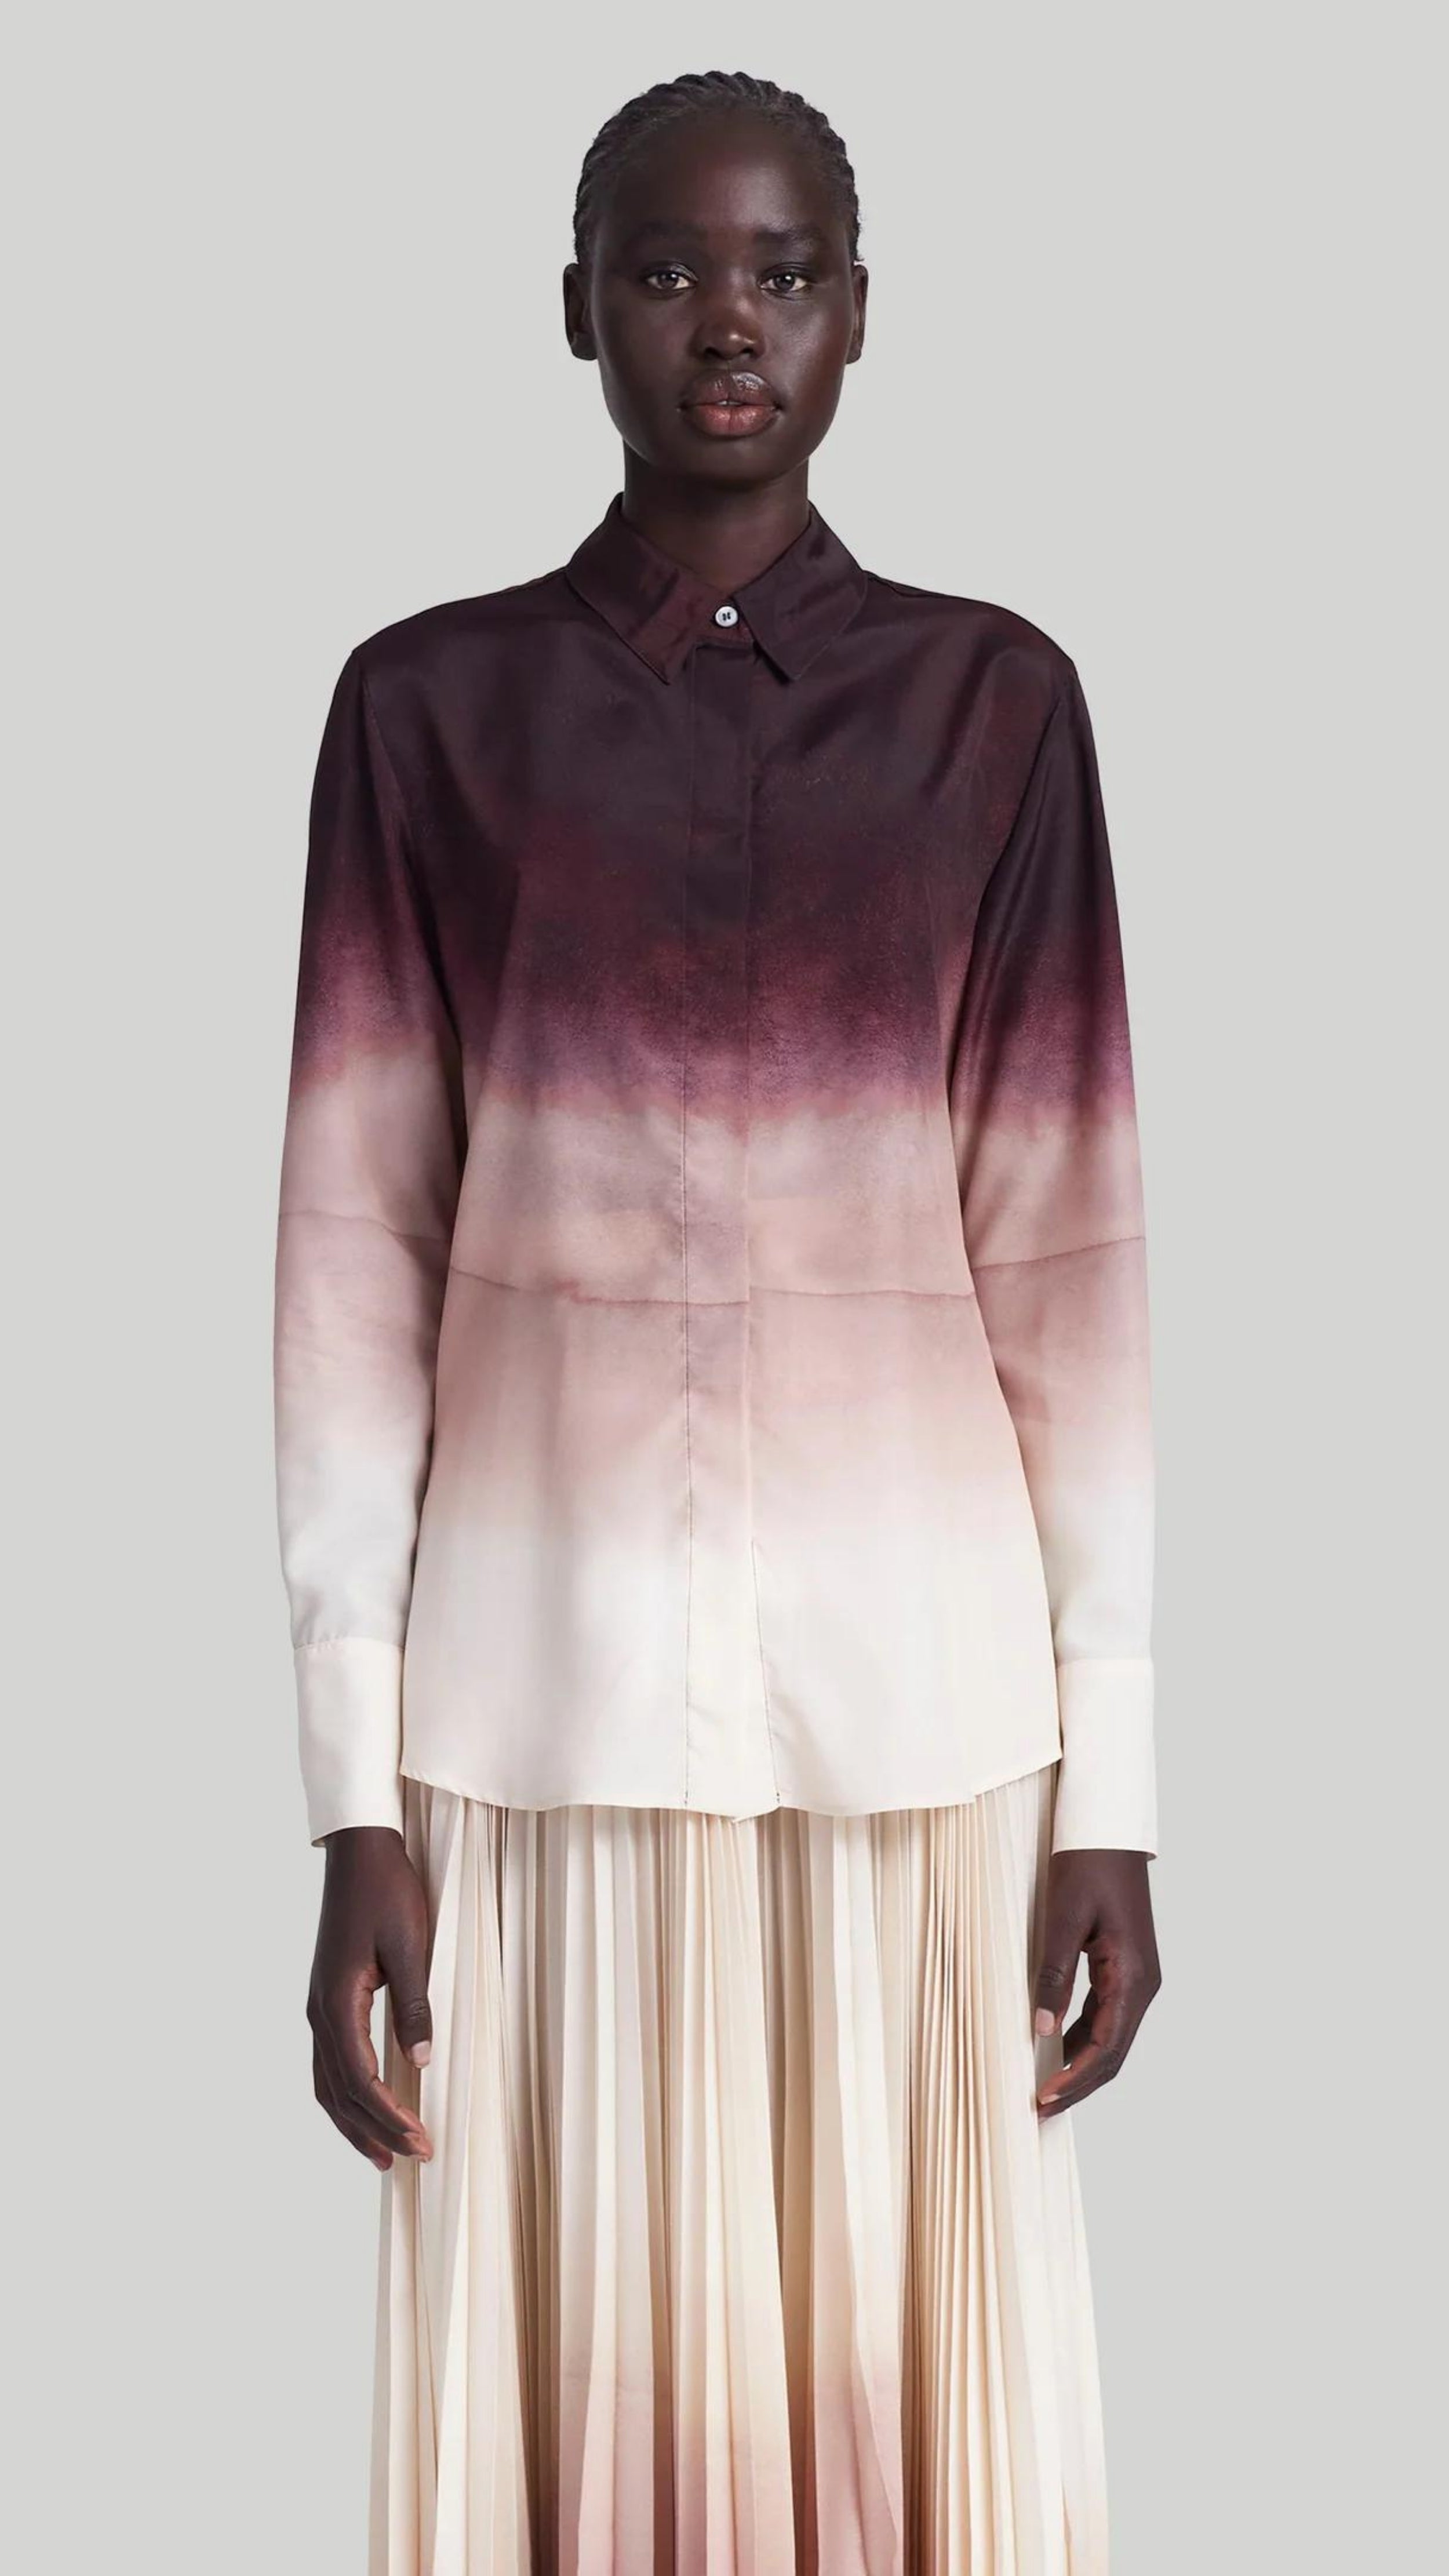 Altuzarra The Chika Top is crafted from Italian silk in an elegant cranberry to ivory dip dye ombre. The classic style button down shirt features a small point collar, concealed button front closure, and long cuffed sleeves. Shown on model facing front.